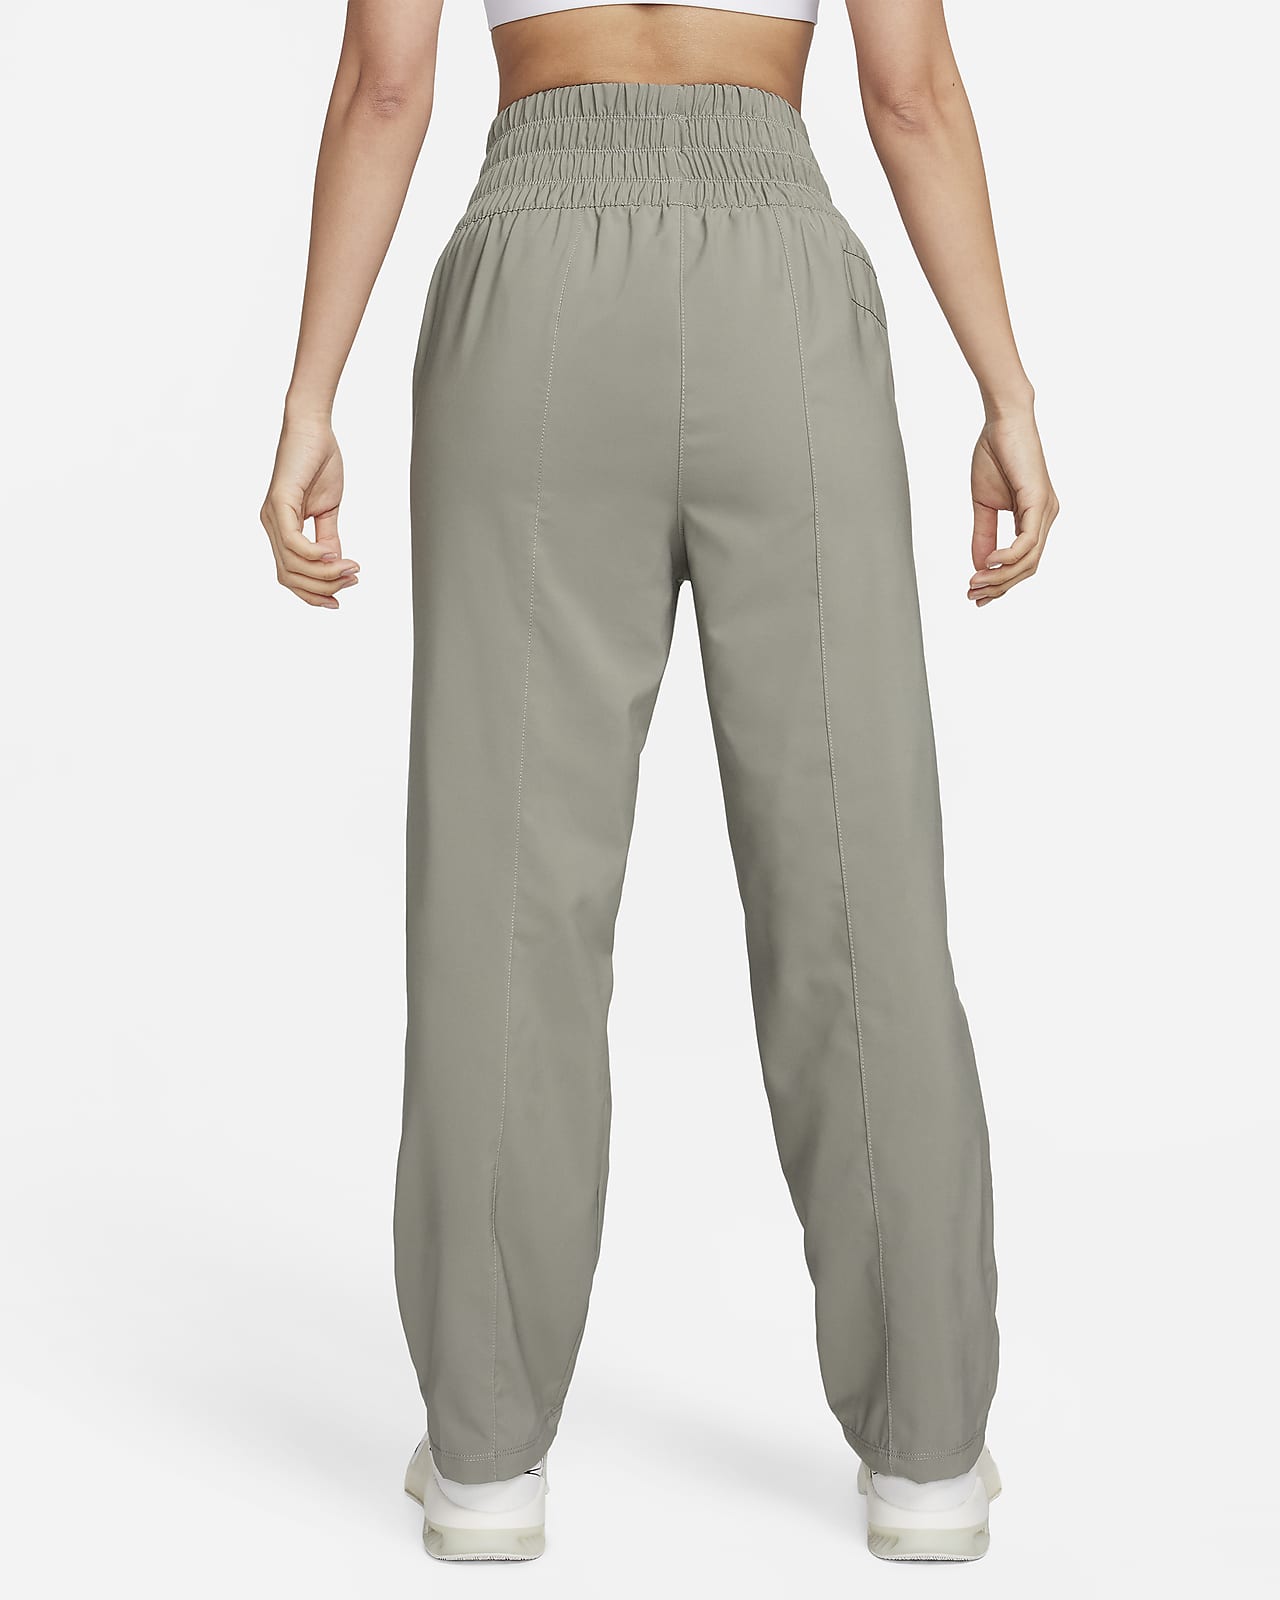 Nike Dri-FIT One Women's Ultra High-Waisted Trousers (Plus Size). Nike IN